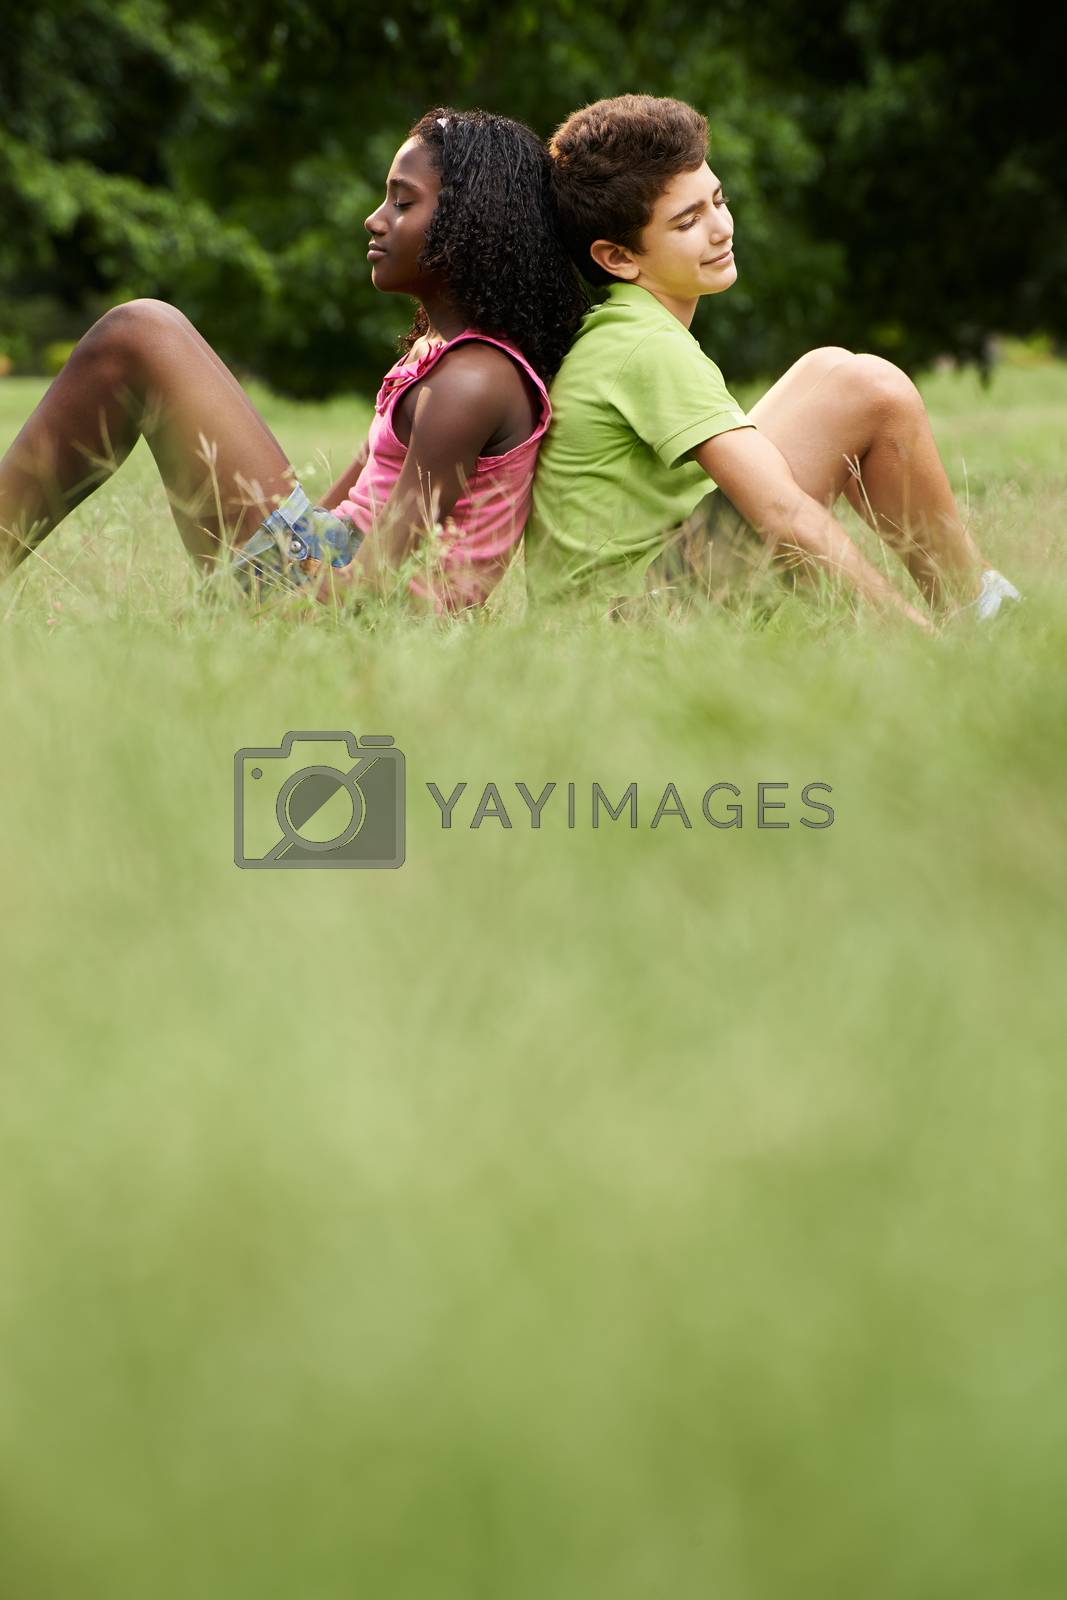 Royalty free image of Interracial couple of black and white kids in love by diego_cervo